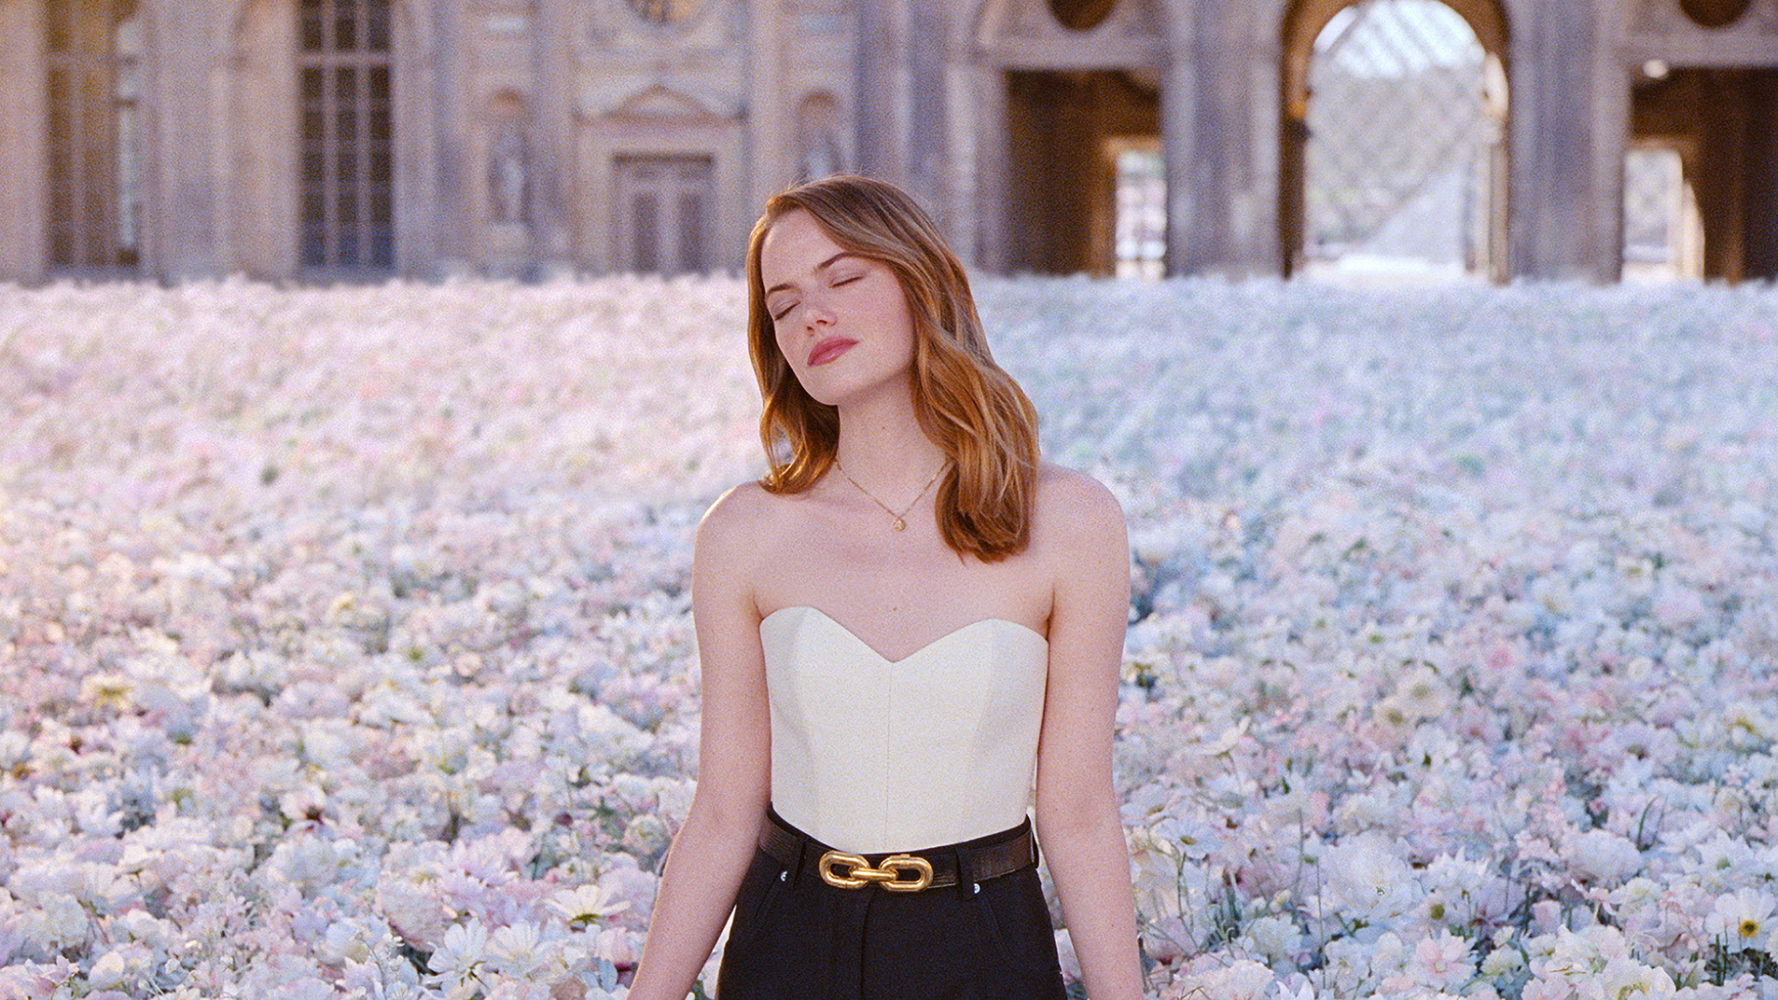 Louis Vuitton reveals campaign for new scent starring ambassador